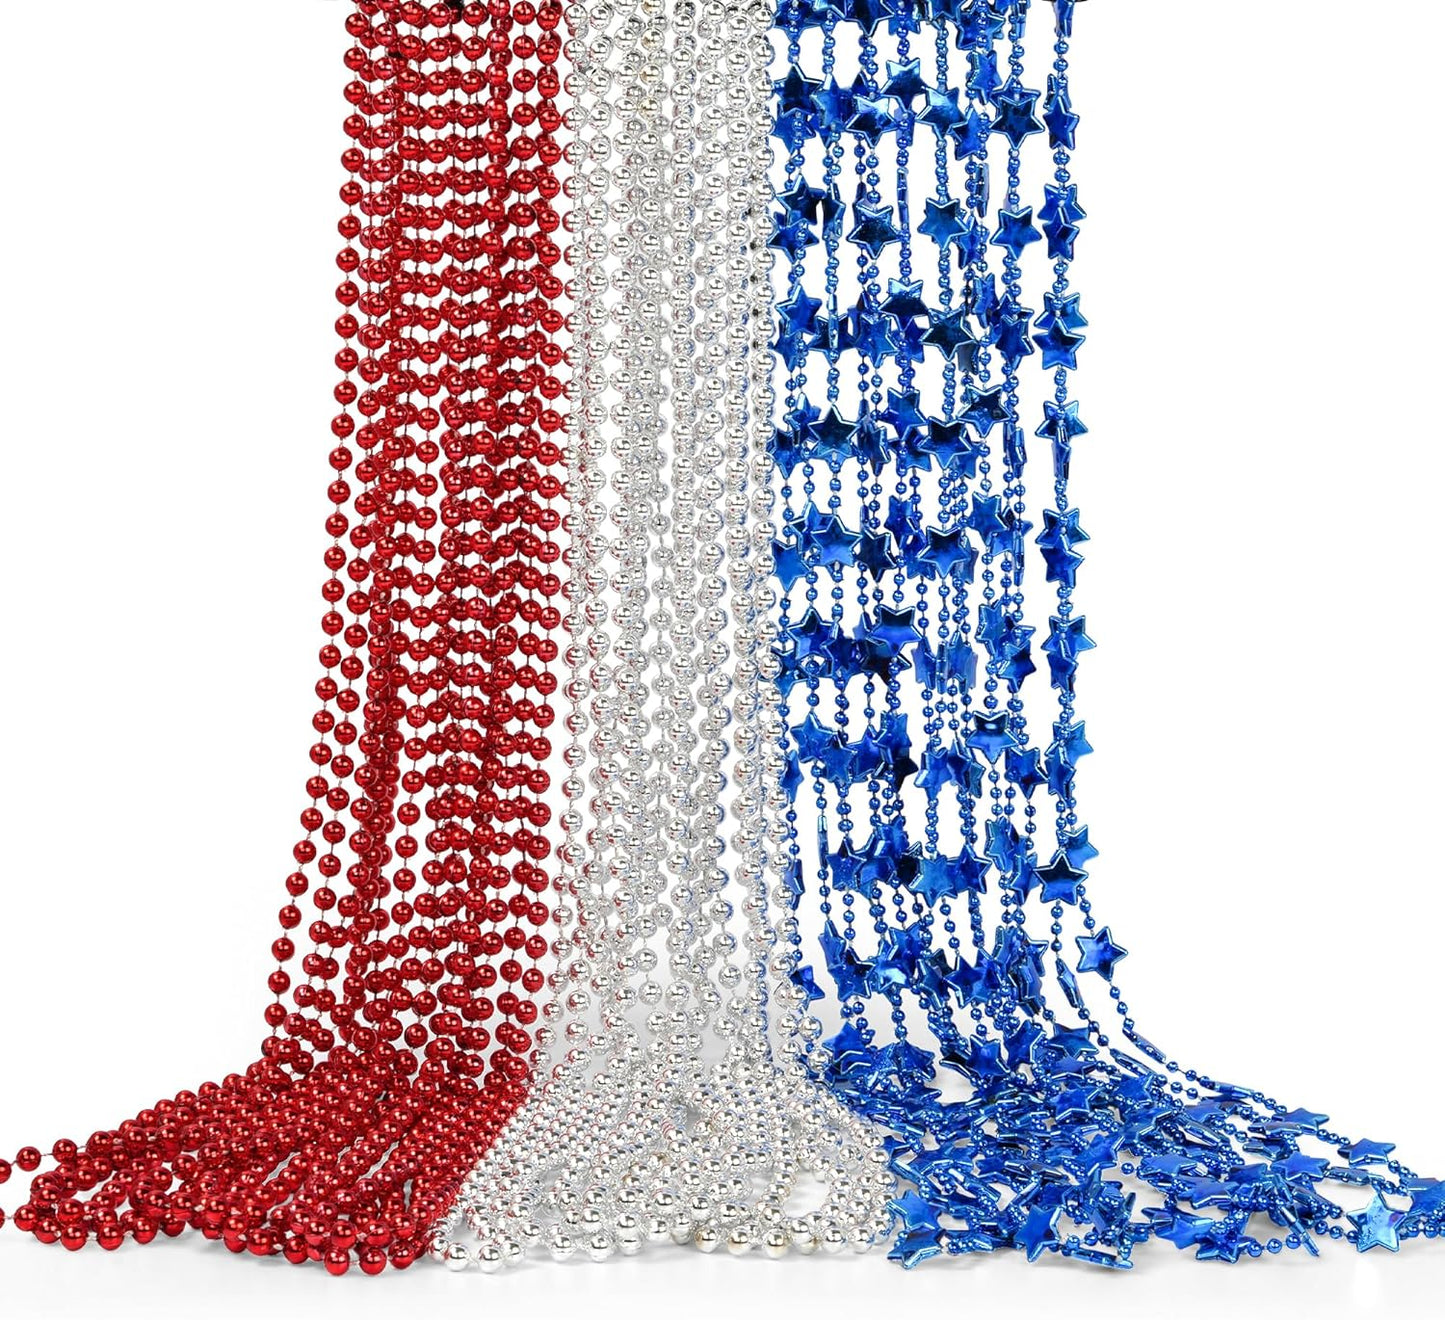 4Th of July Beaded Necklace, 24Pcs Patriotic Star Bead Necklaces Red Silver and Blue Accessories,Fourth of July Beads for Independence Day,Memorial Day Patriotic Parades,Party Decor Supplies